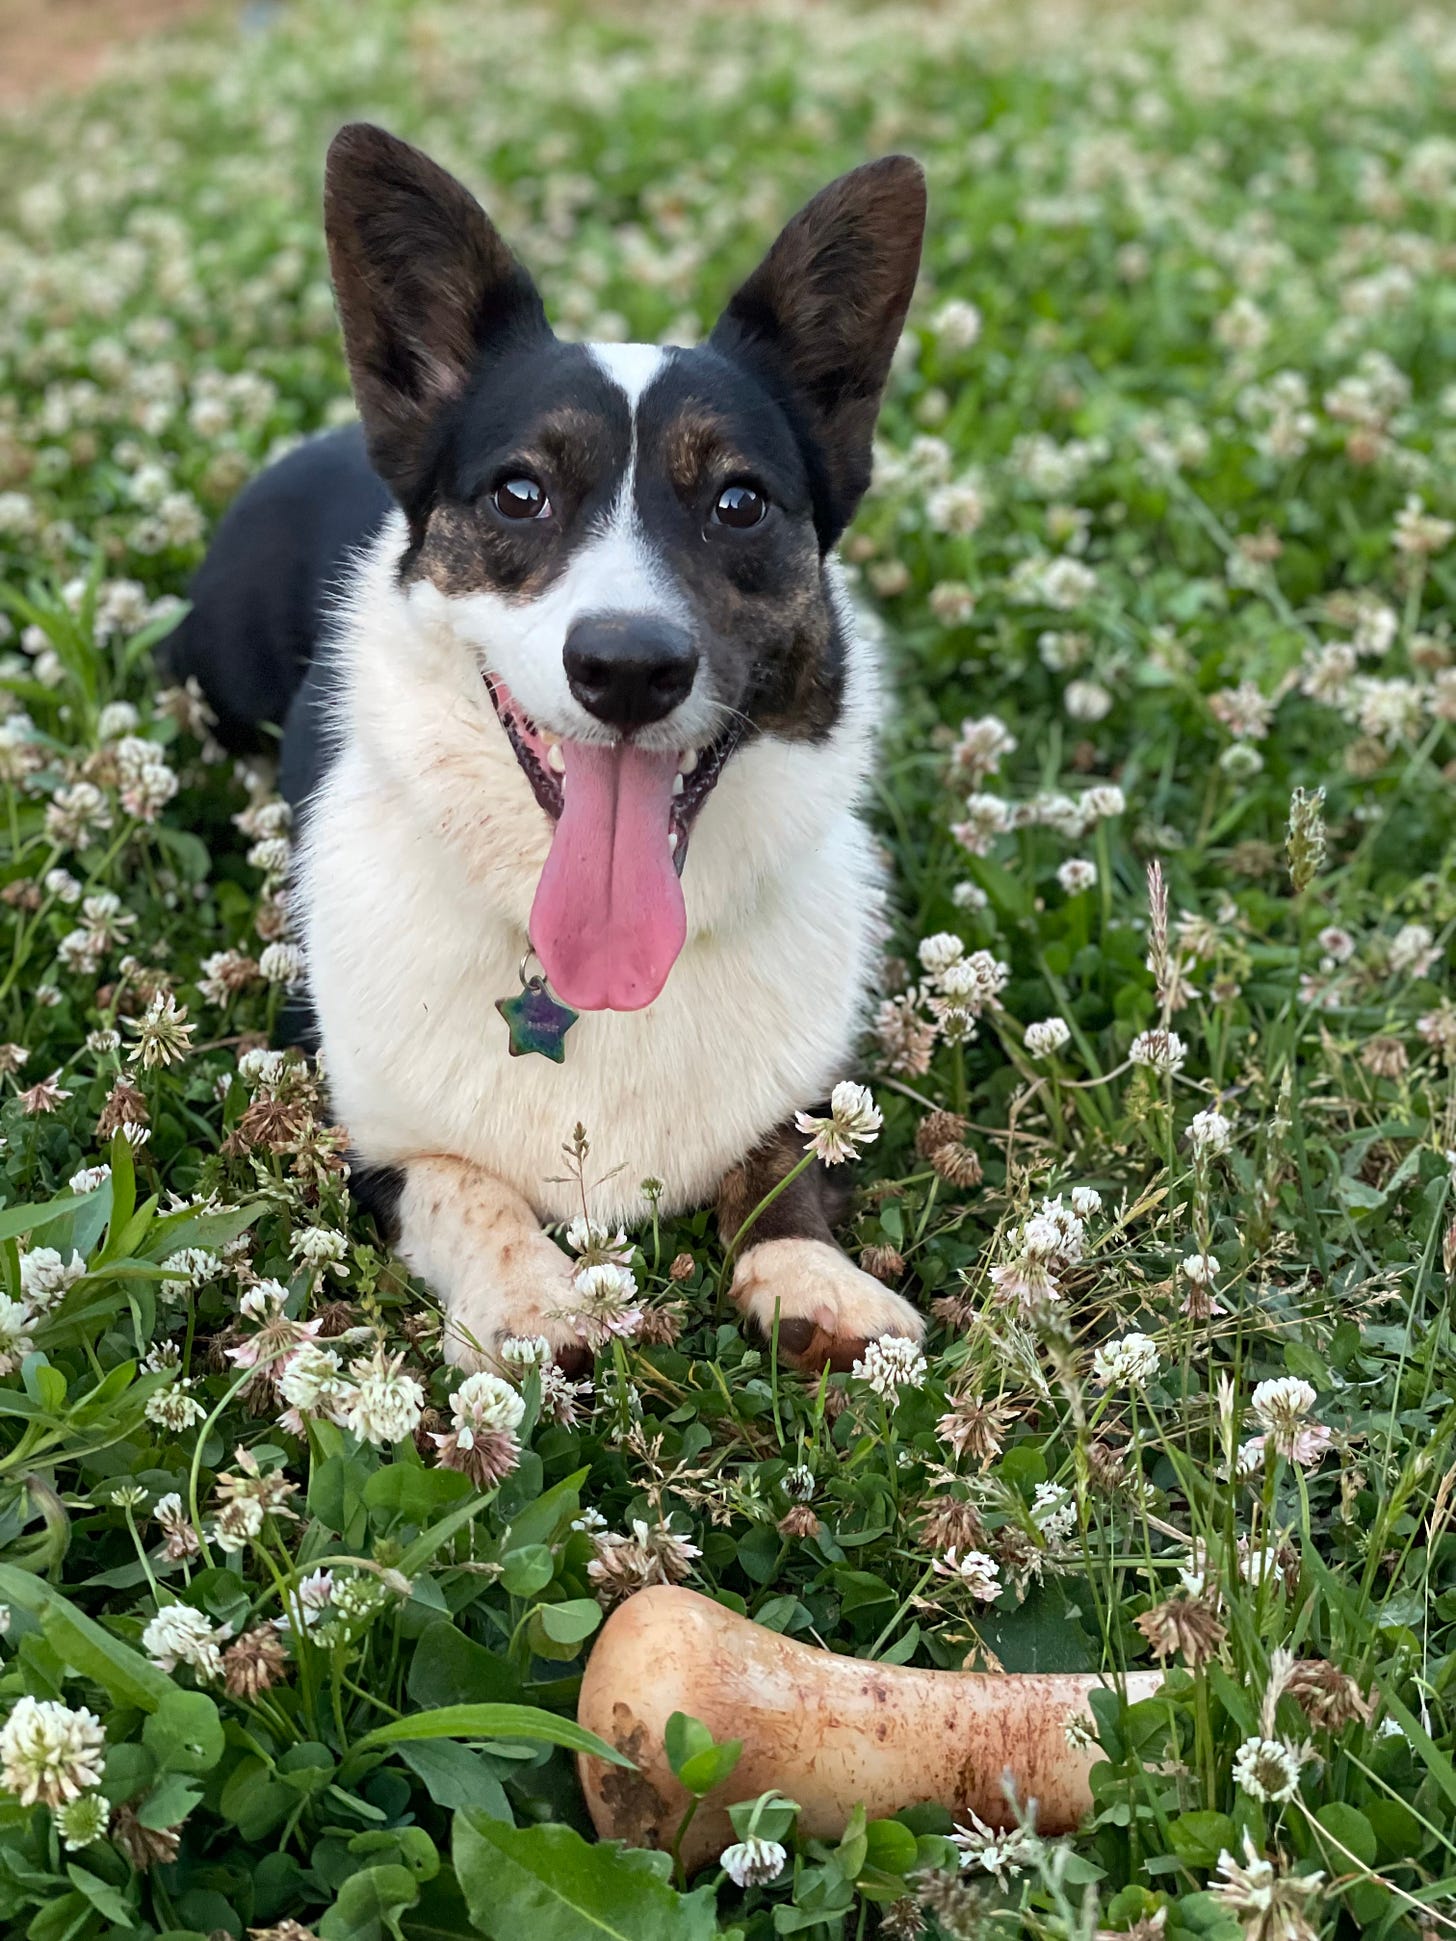 a photo of Gwen, a black and white Cardigan Welsh Corgi, sitting in a field of European Clover ☘️ A bone sits close to the camera. Gwen is smiling